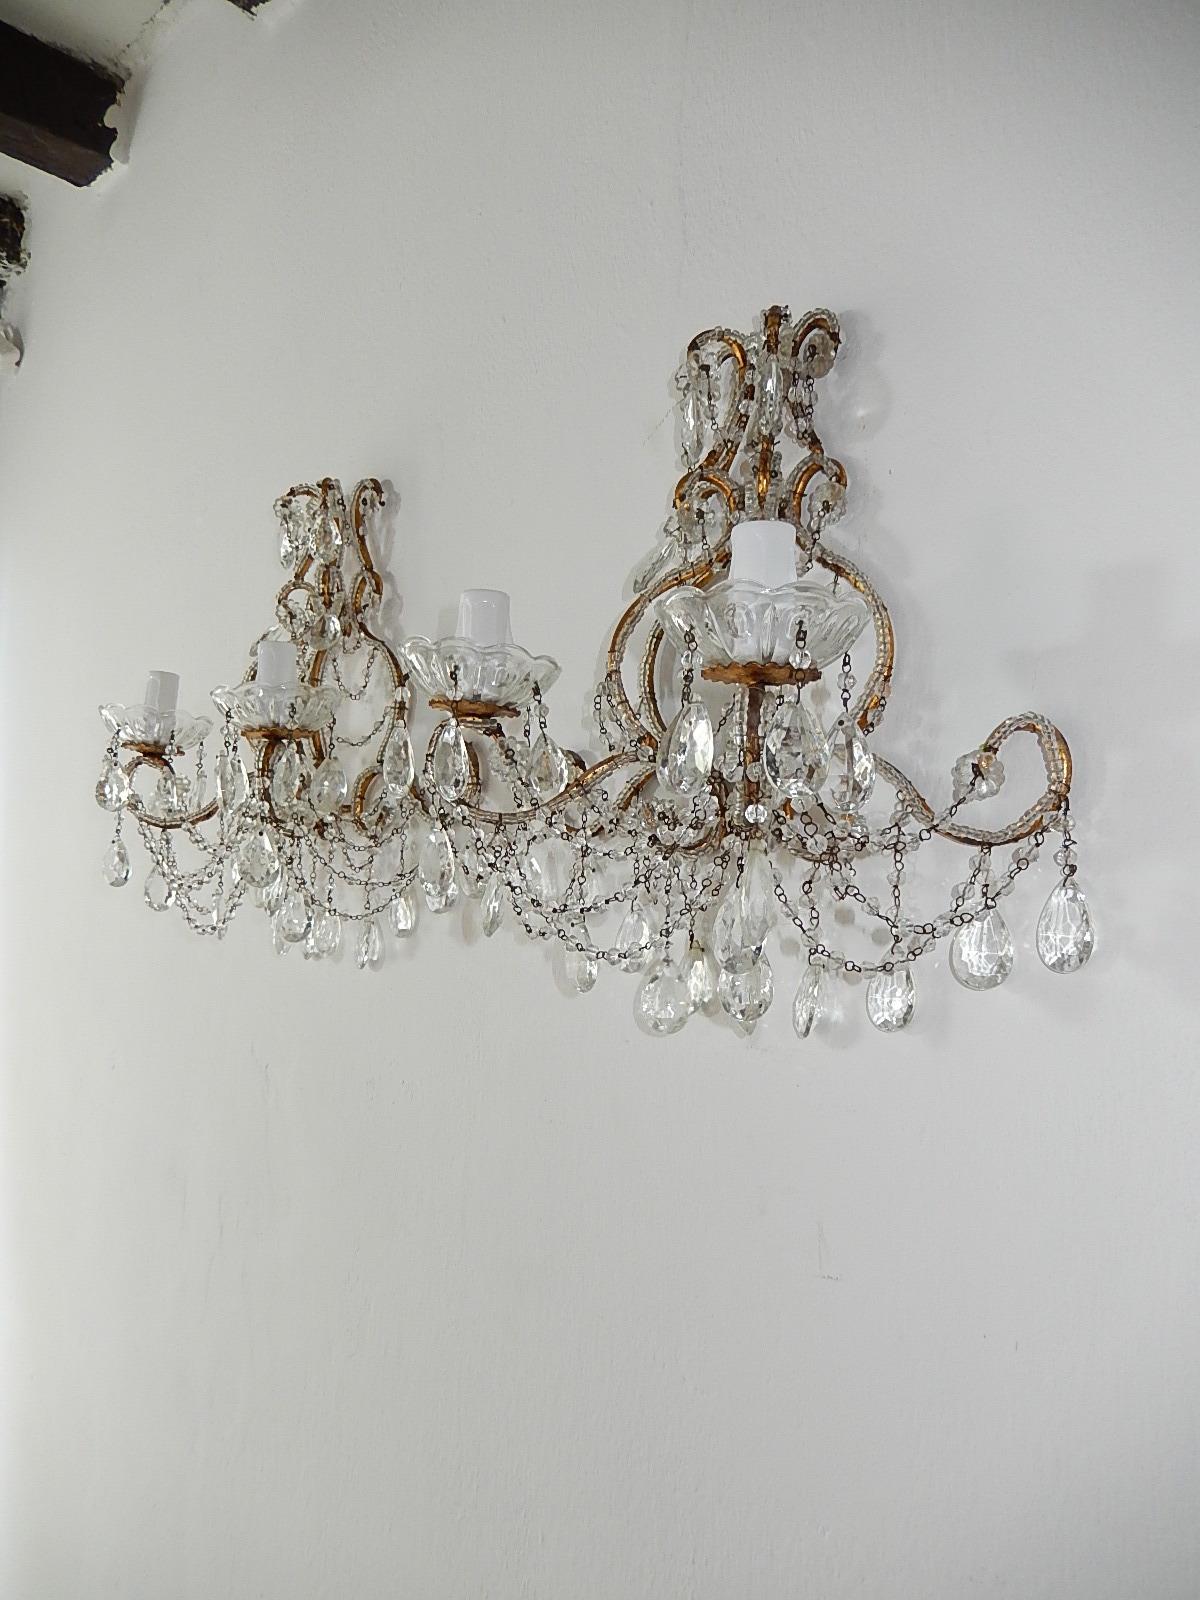 1900 Italian Rococo Beaded Crystal Prisms Gold Gilt Sconces In Good Condition For Sale In Modena (MO), Modena (Mo)